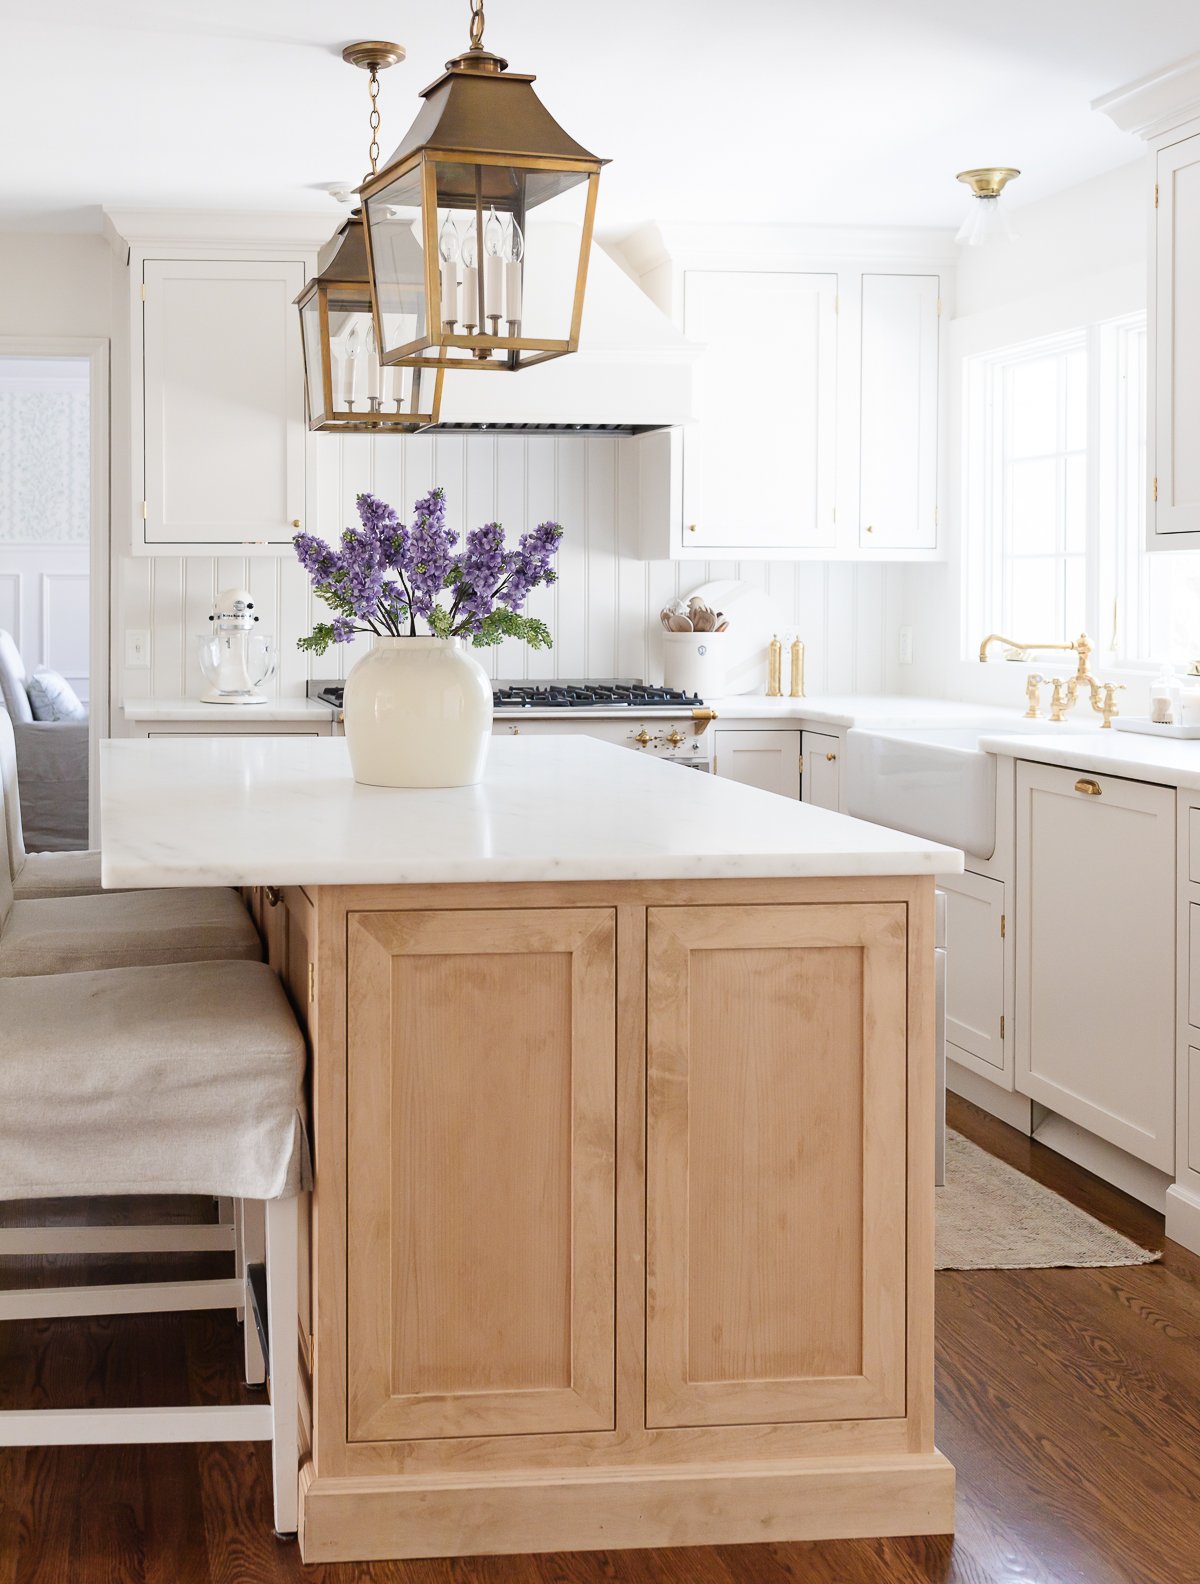 A cream kitchen with inset cabinets and a wood island.